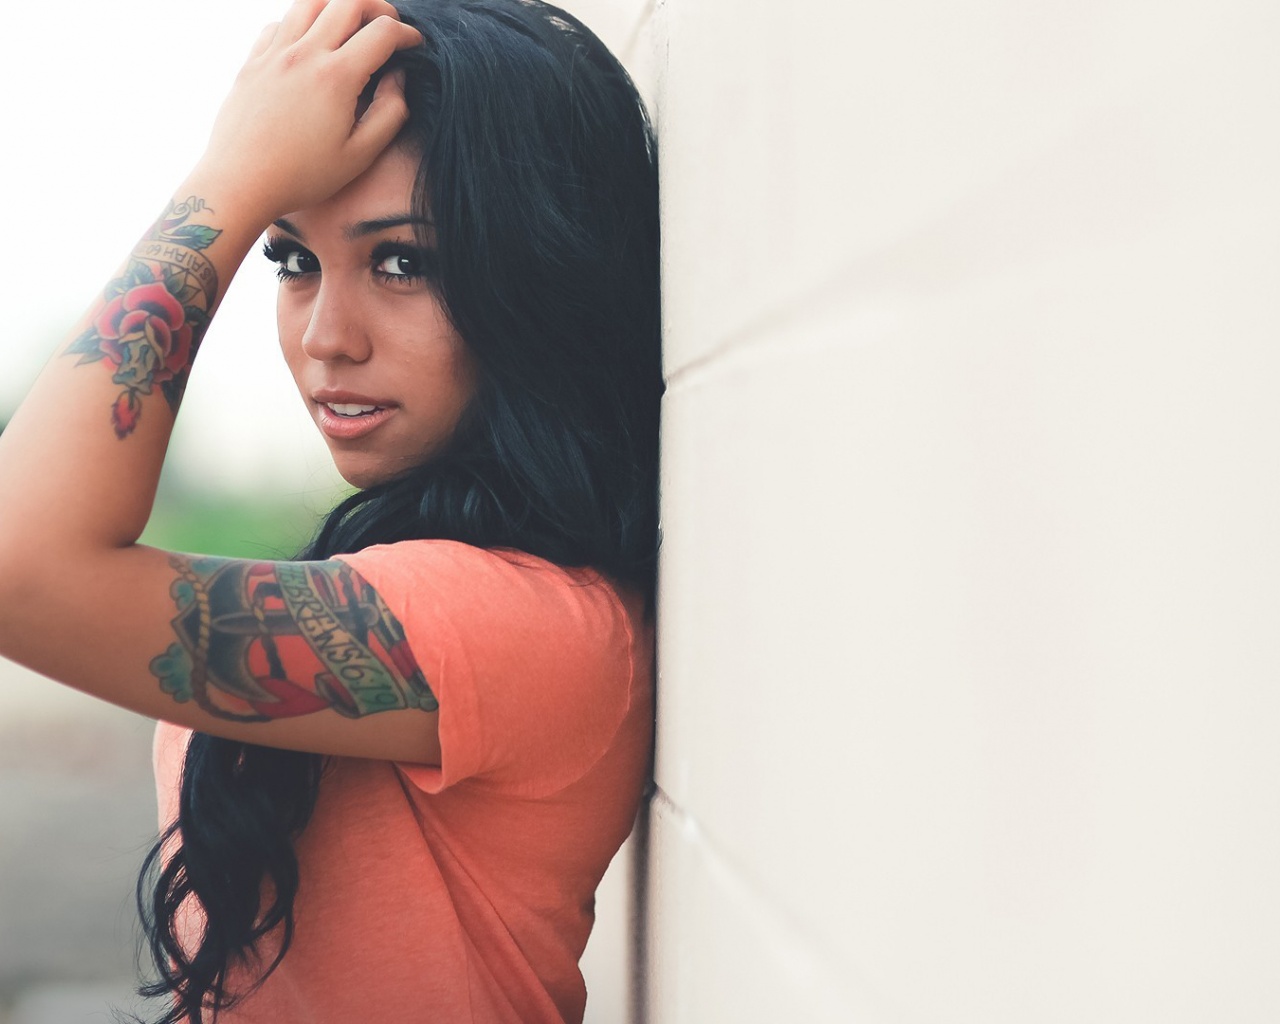 Download Tattoo Brown Skinned Girl Wallpaper in 1280x1024 Resolution